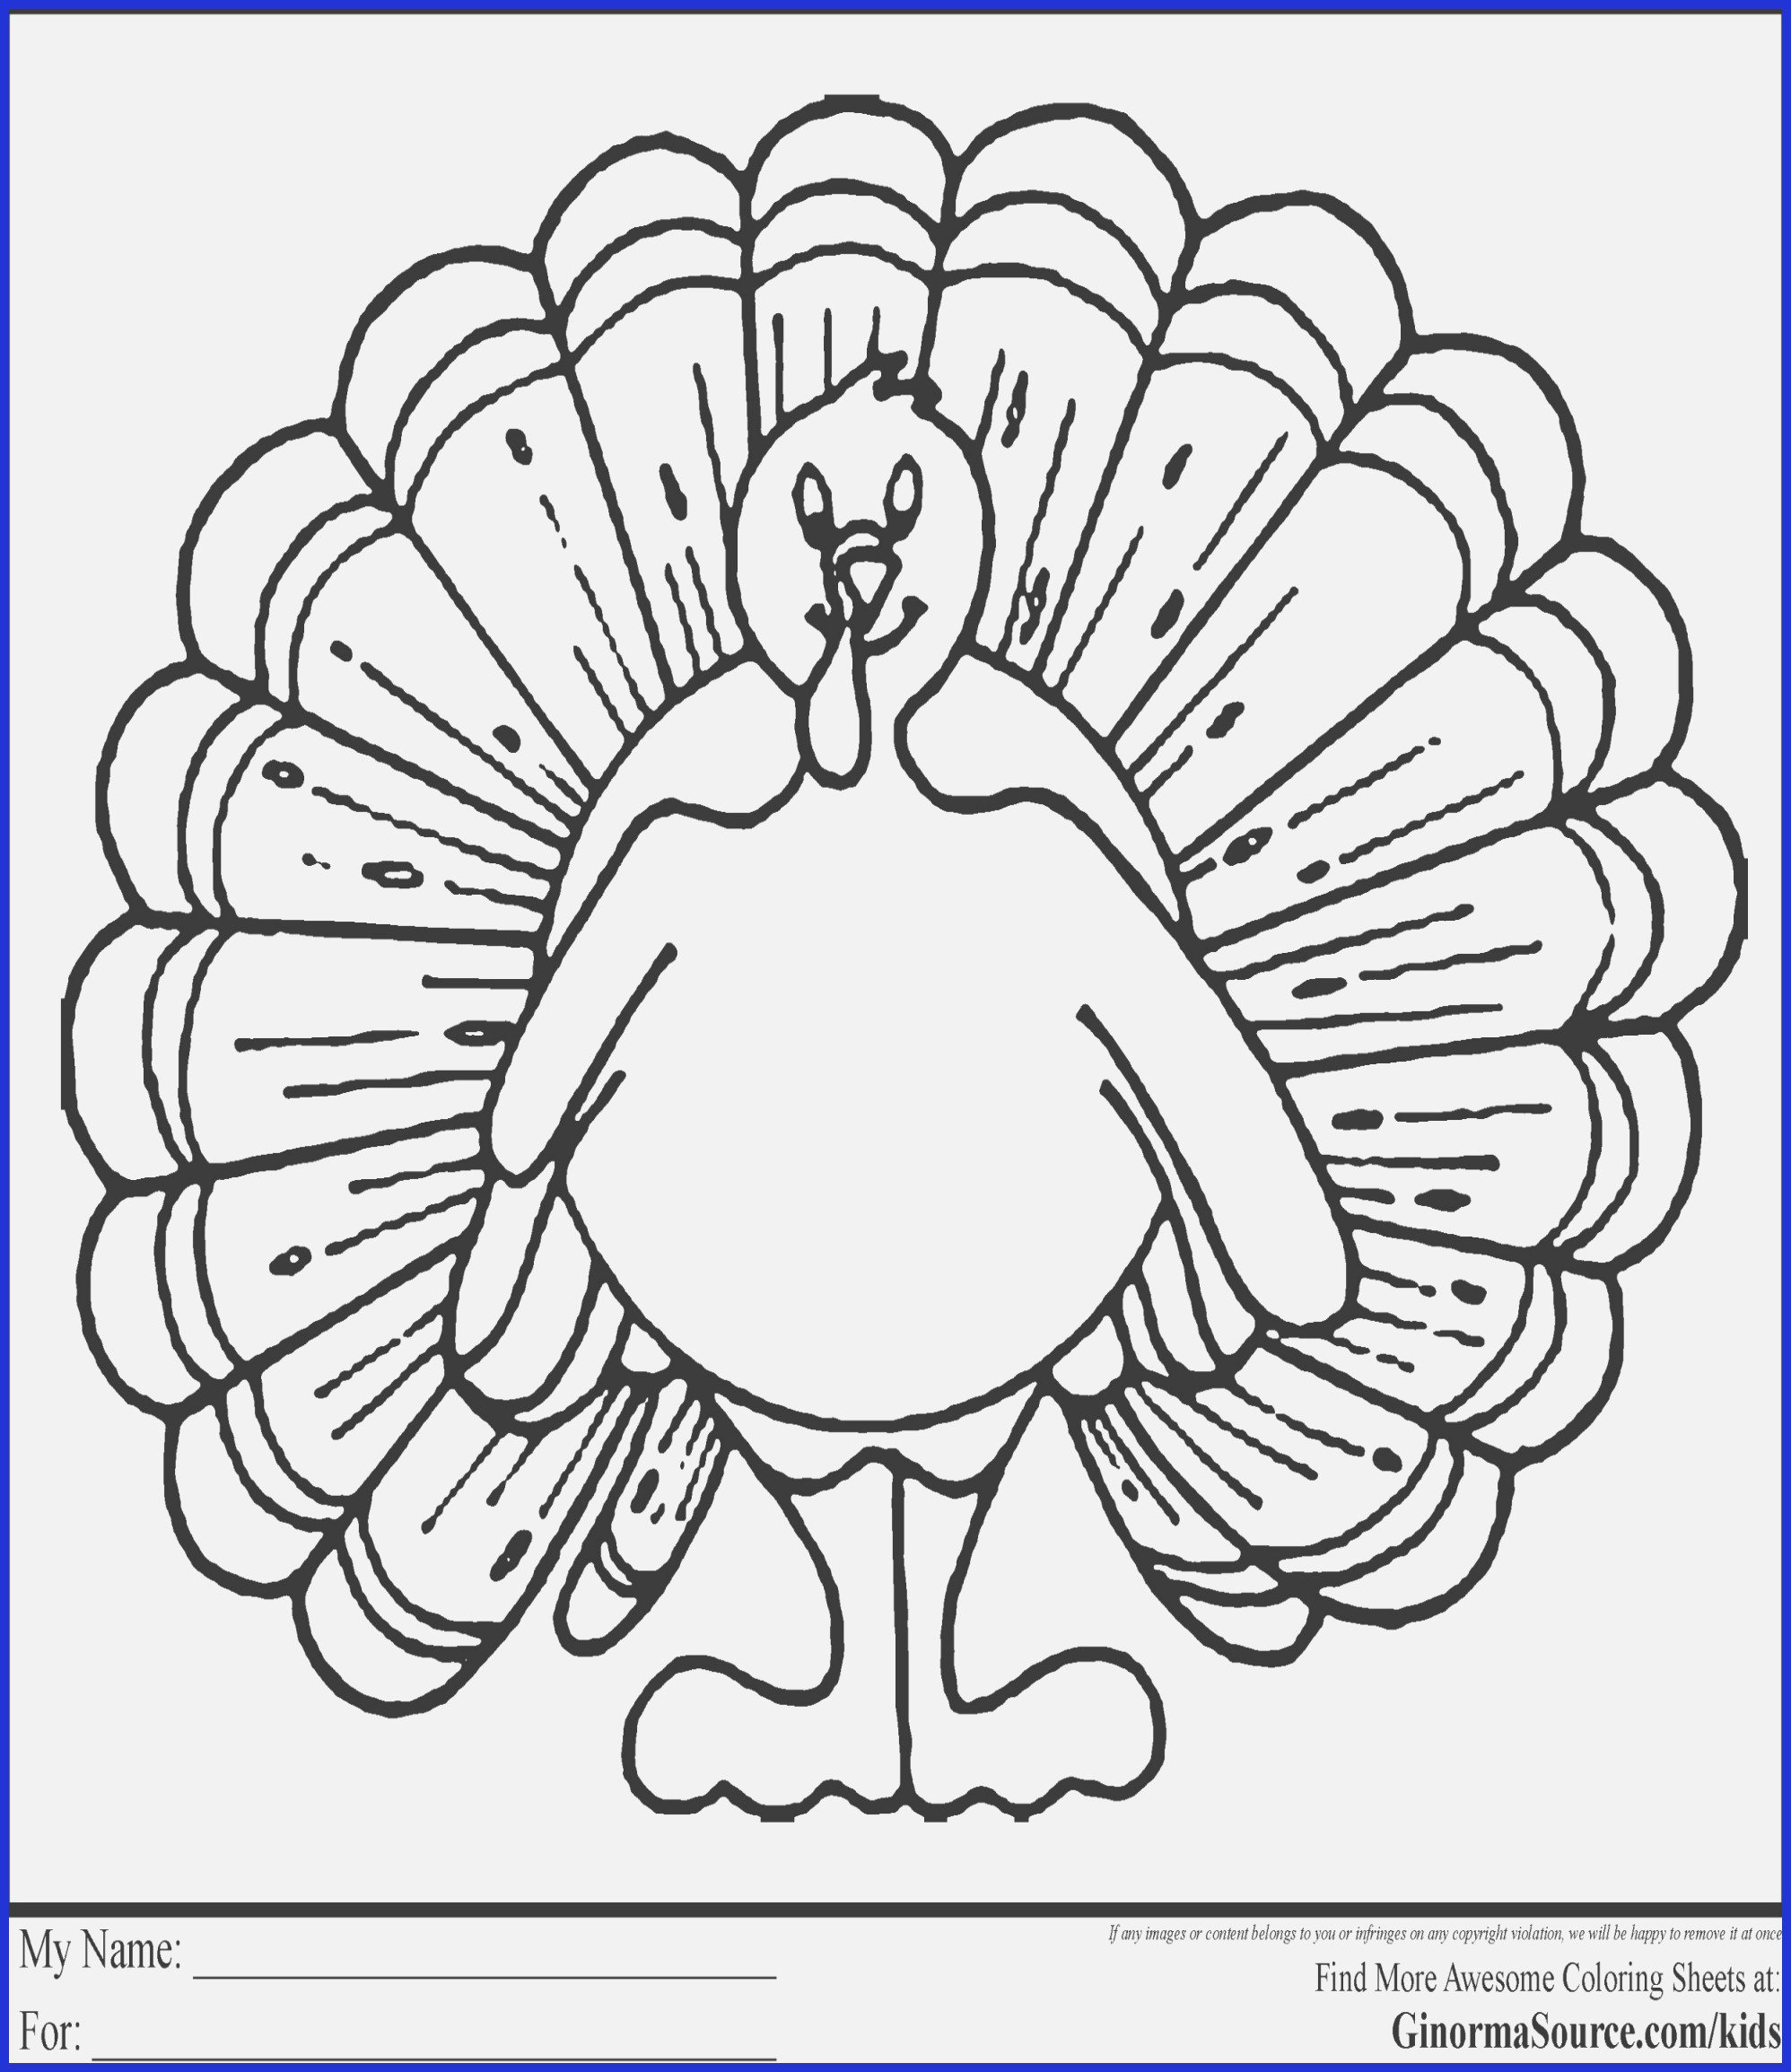 Religious Coloring Pages For Kids Coloring Book Ideas Thanksgiving Coloring Pages Religious